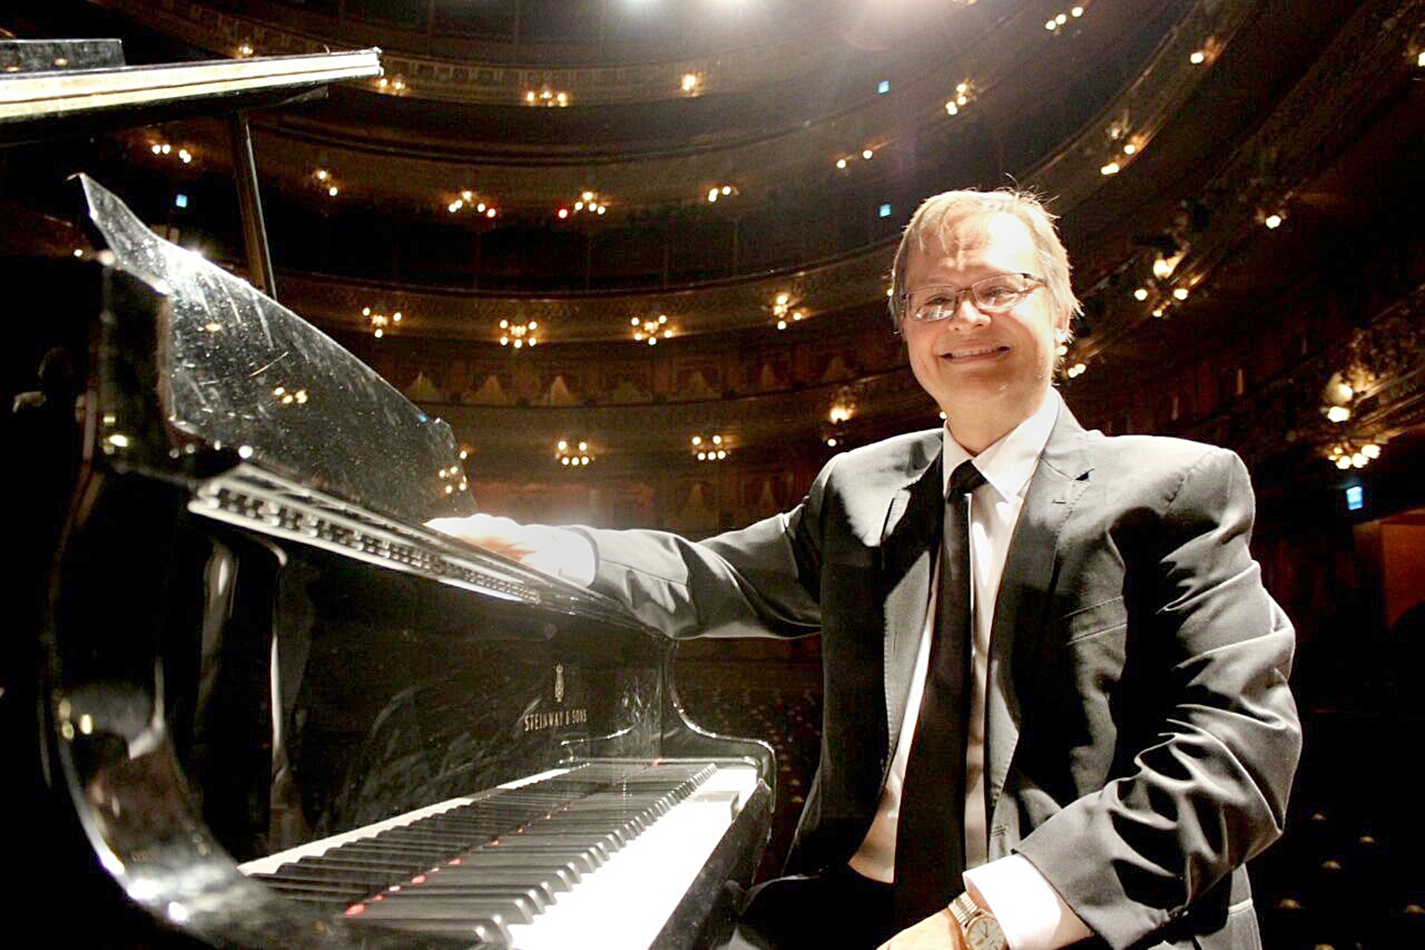 South music professor Oscar Dressler poses with the piano he performed on during a concert in Buenos Aires, Argentina.